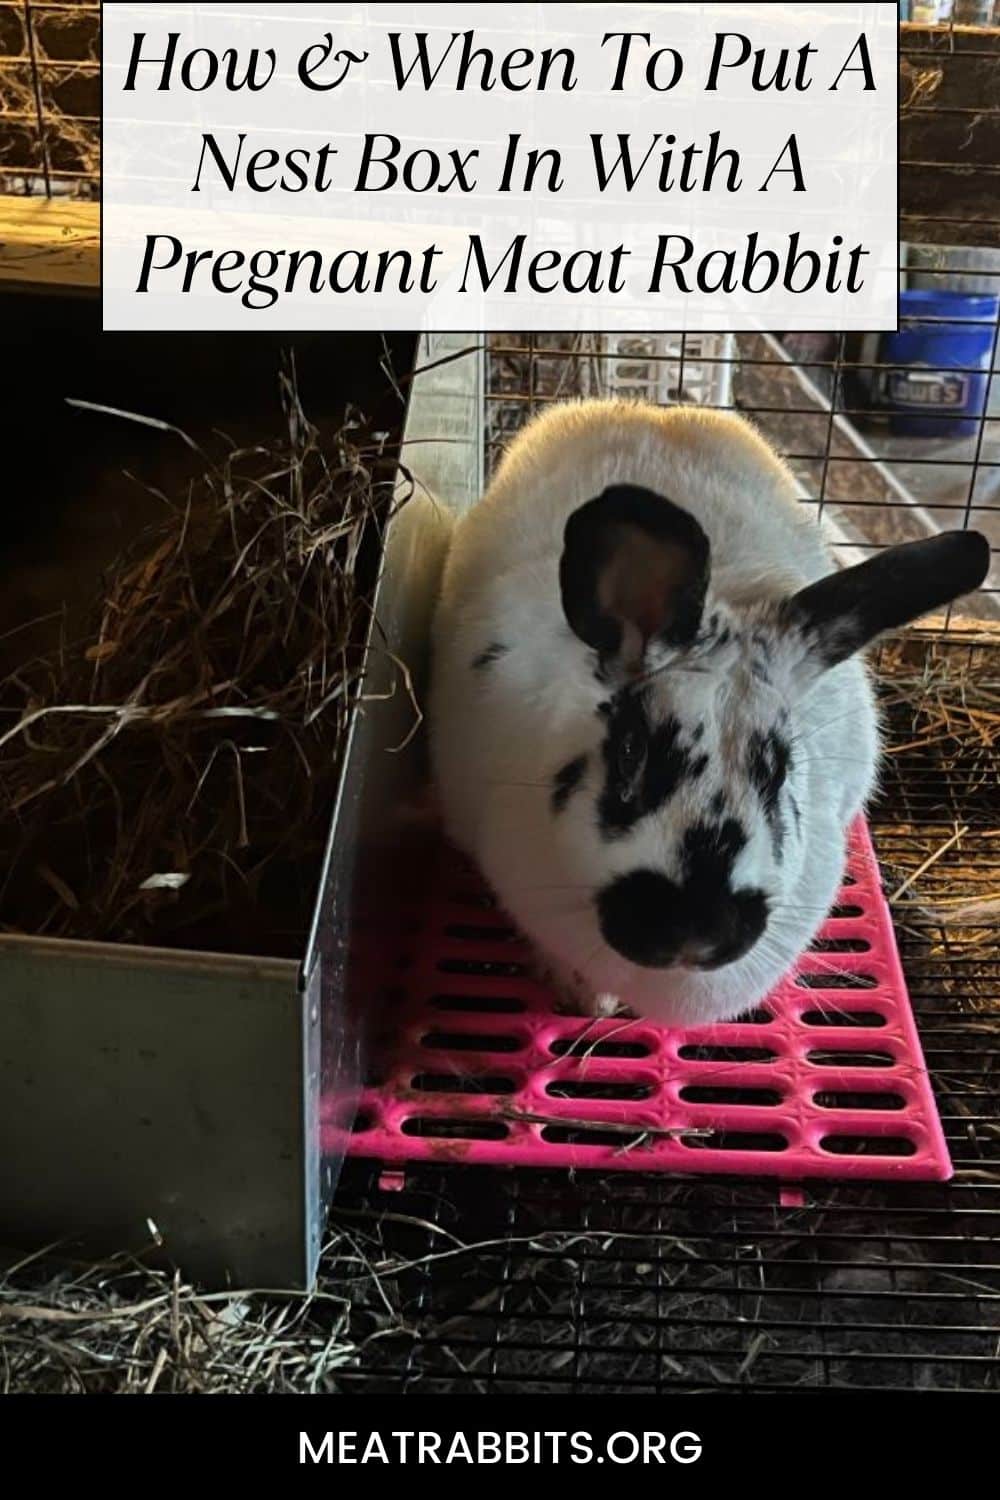 How & When To Put A Nest Box In With A Pregnant Meat Rabbit pinterest image.